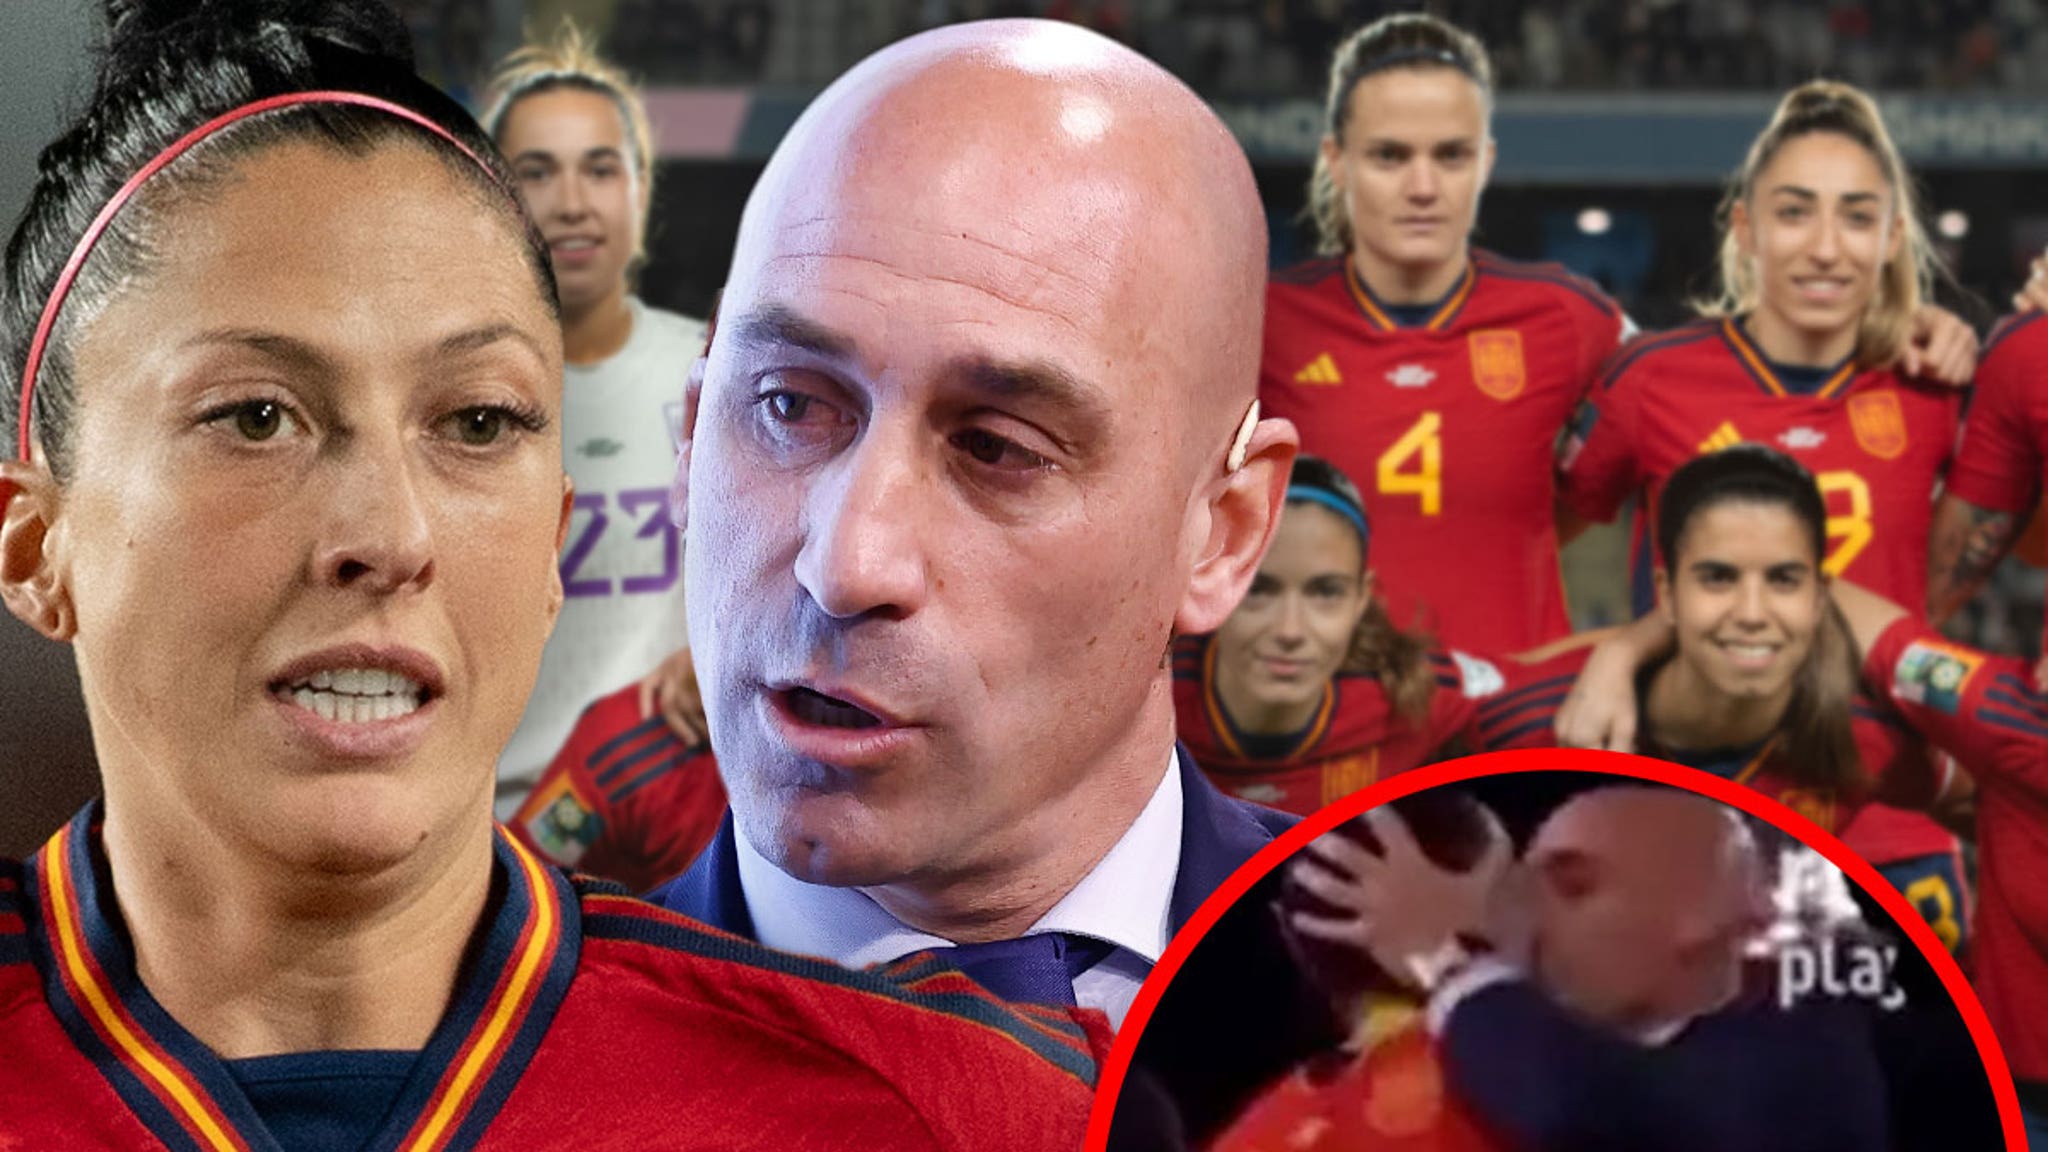 Spain's WWC team refuses to play until Luis Rubiales is ousted over kissing scandal